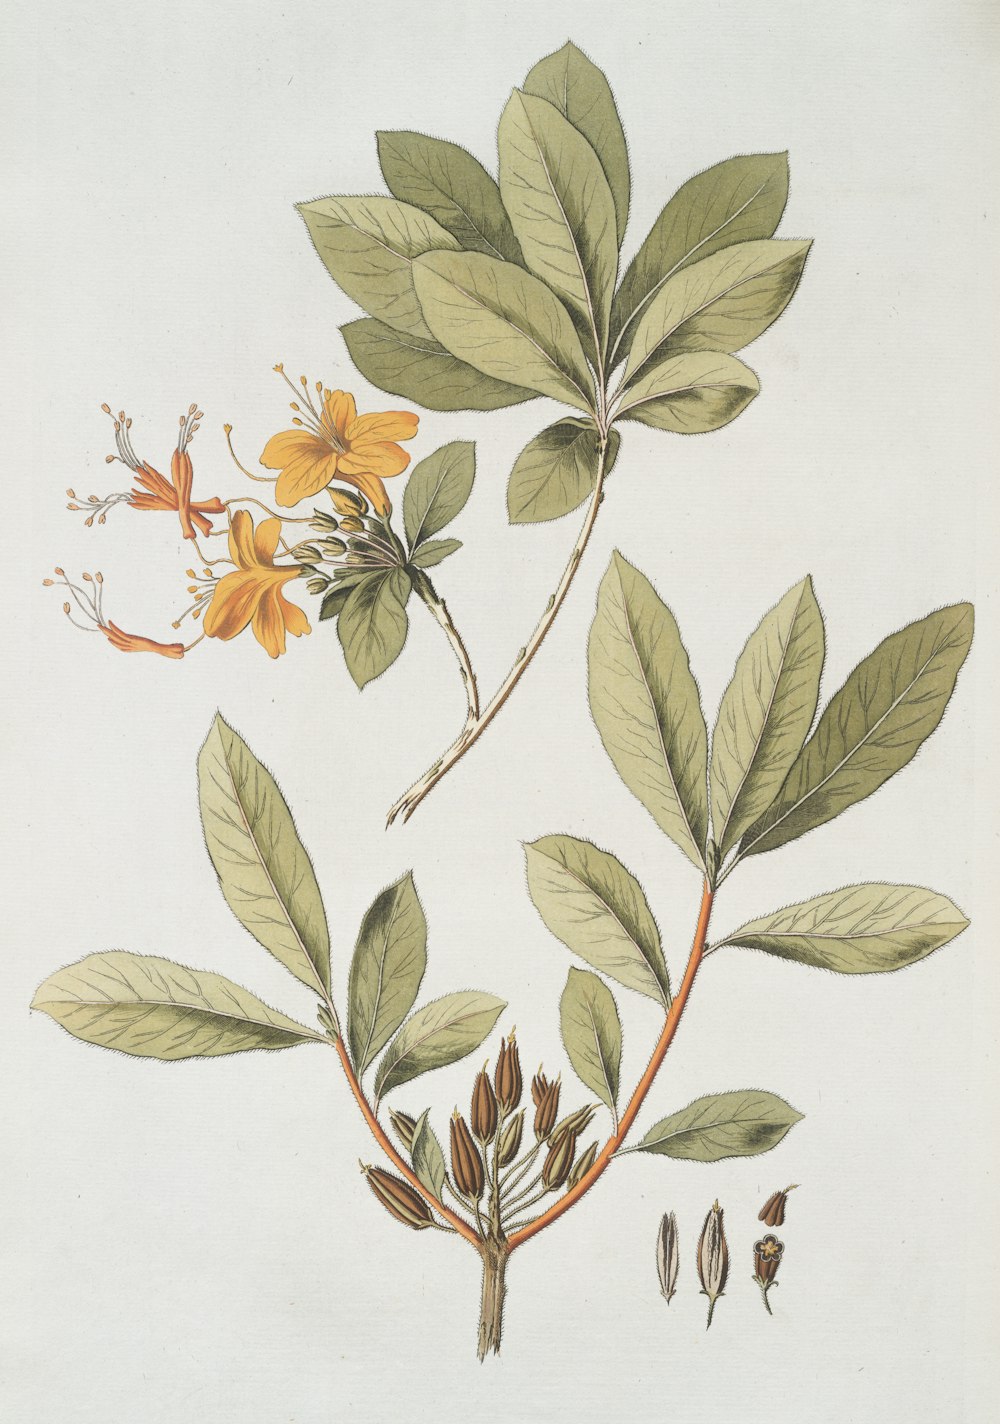 a drawing of a plant with leaves and flowers